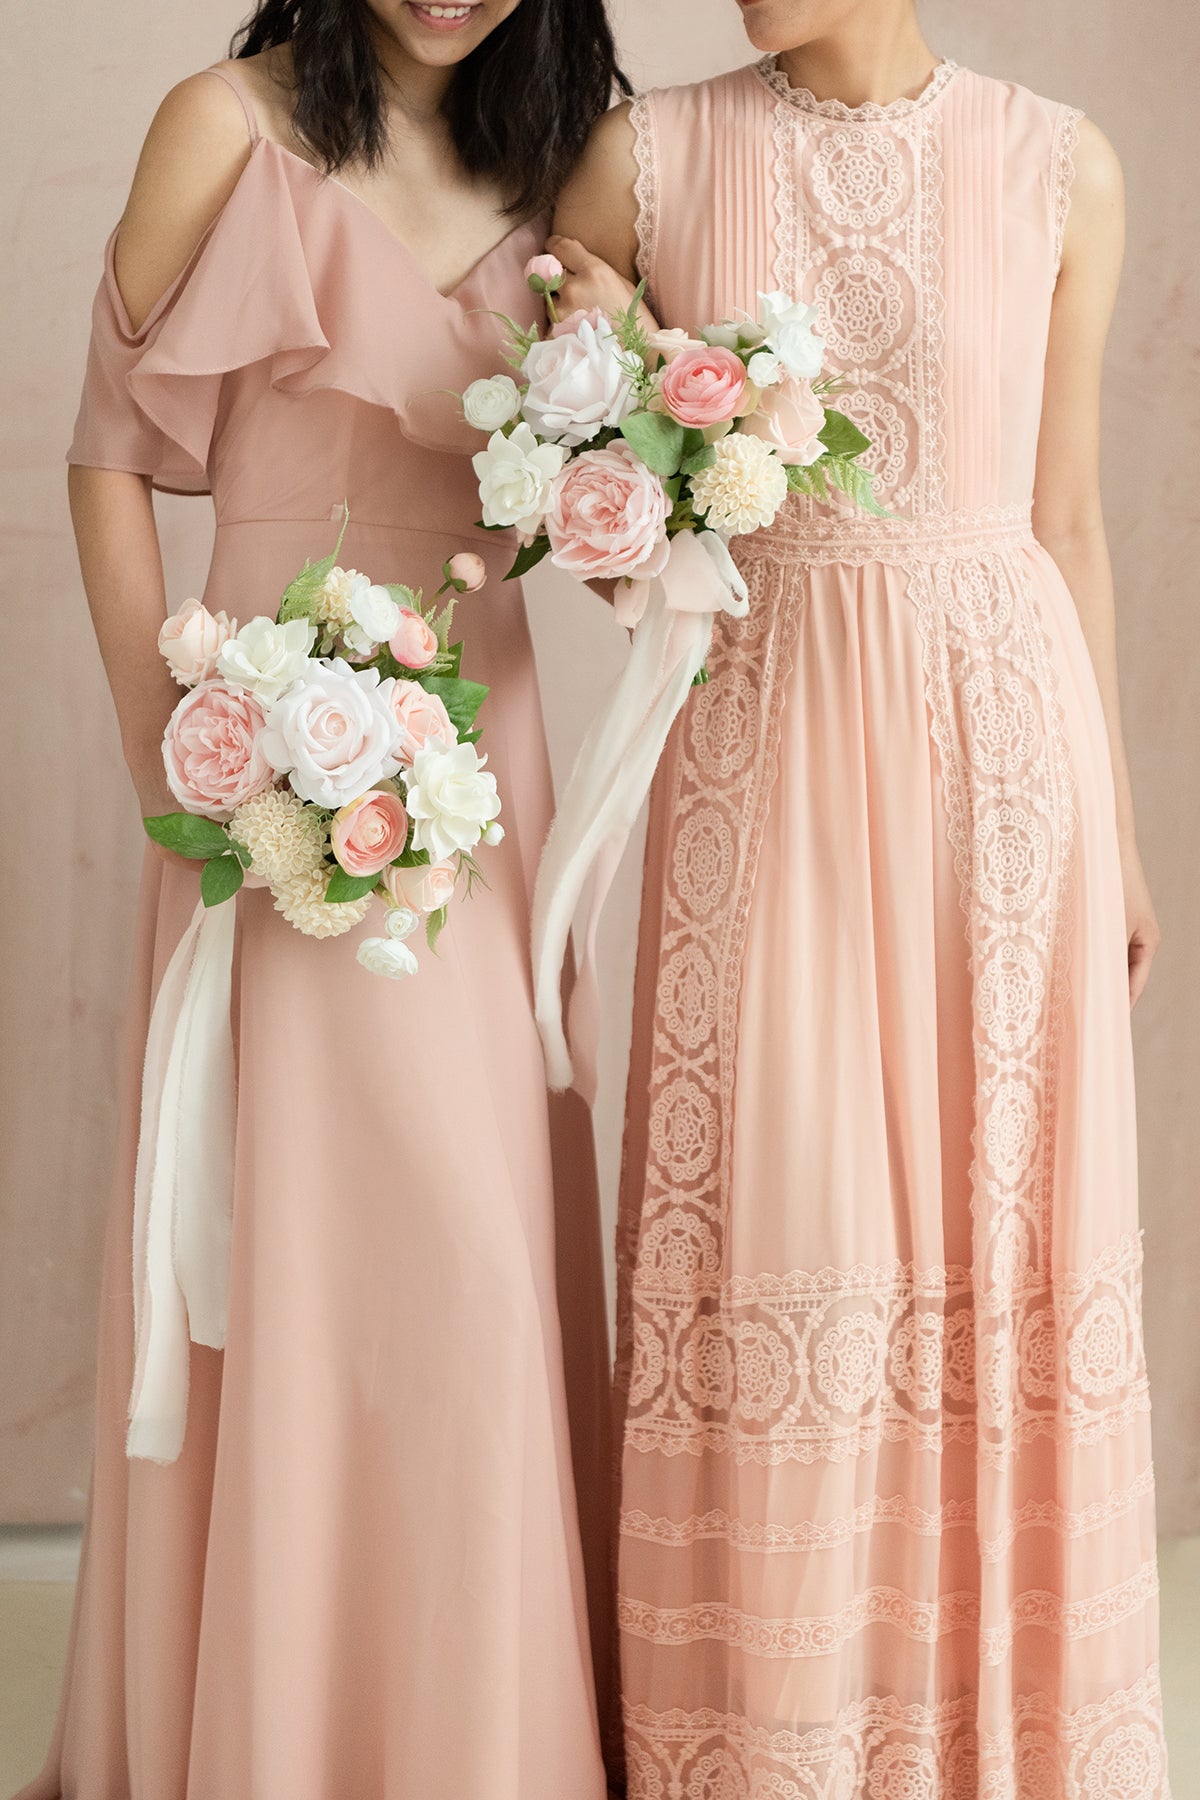 Free-Form Bridesmaid Bouquets in Blush & Cream – Ling's Moment